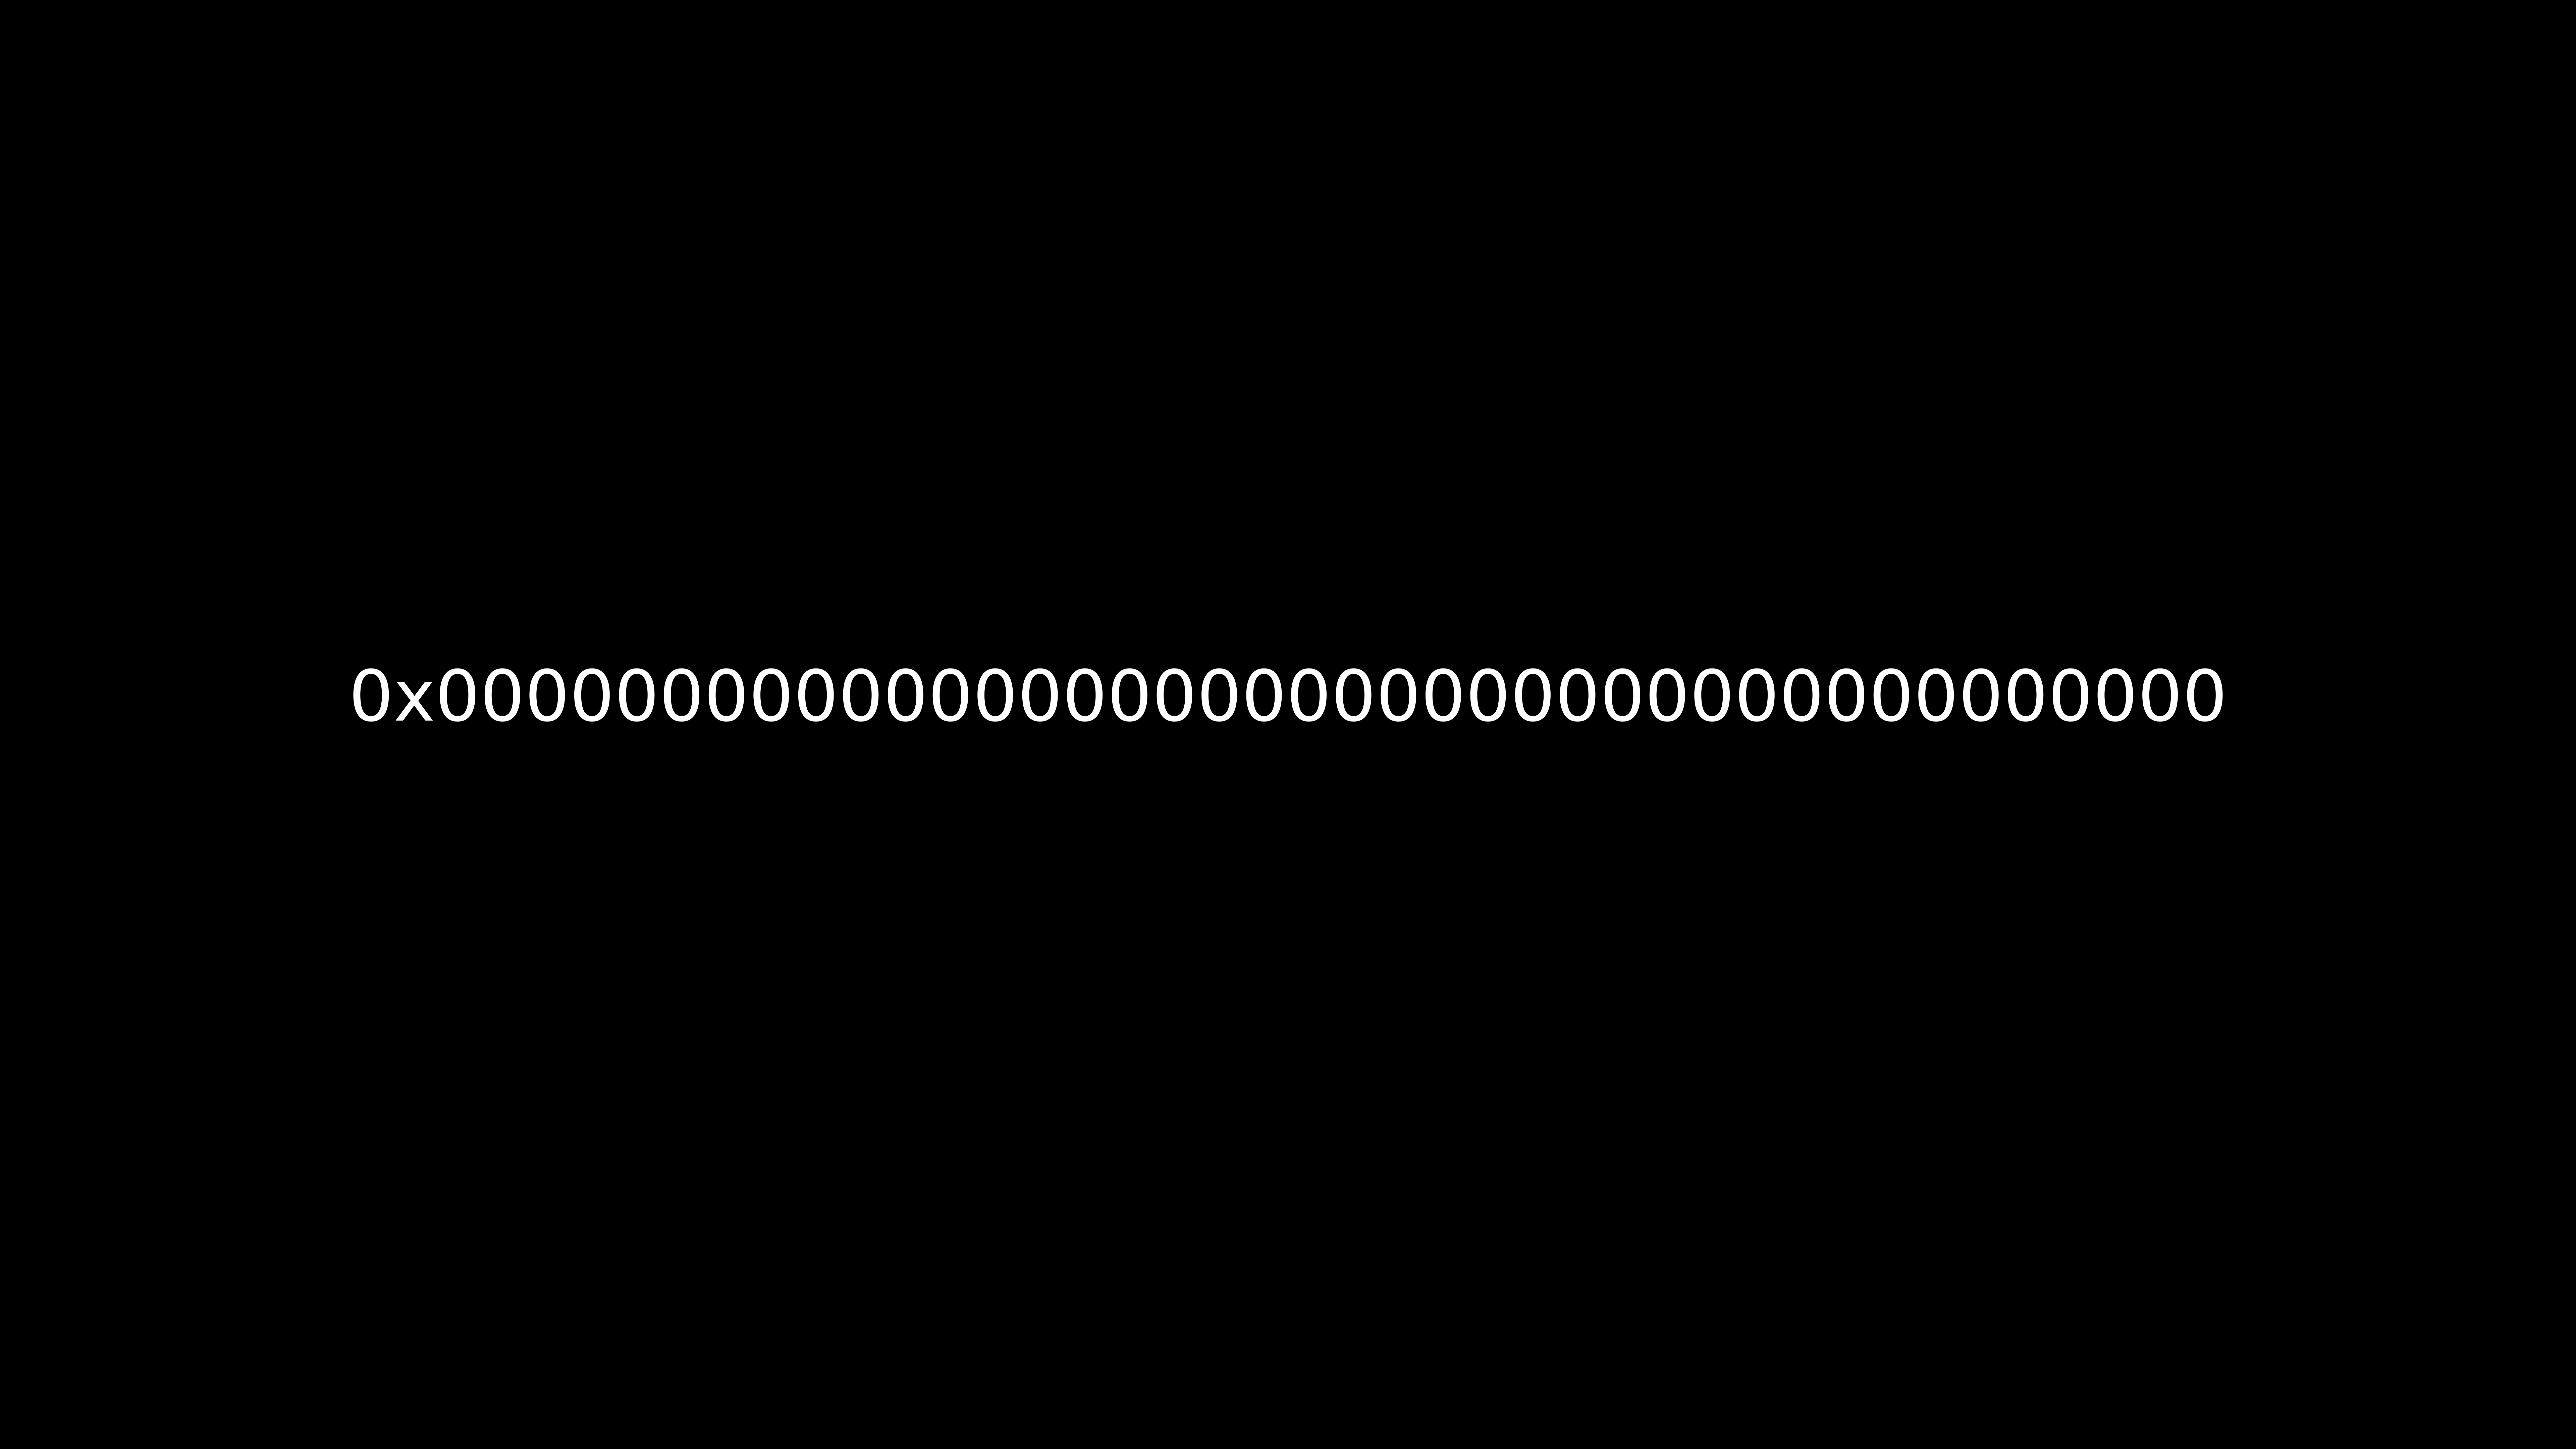 0x00000&hellip;, the Ethereum null address, in white on black text.